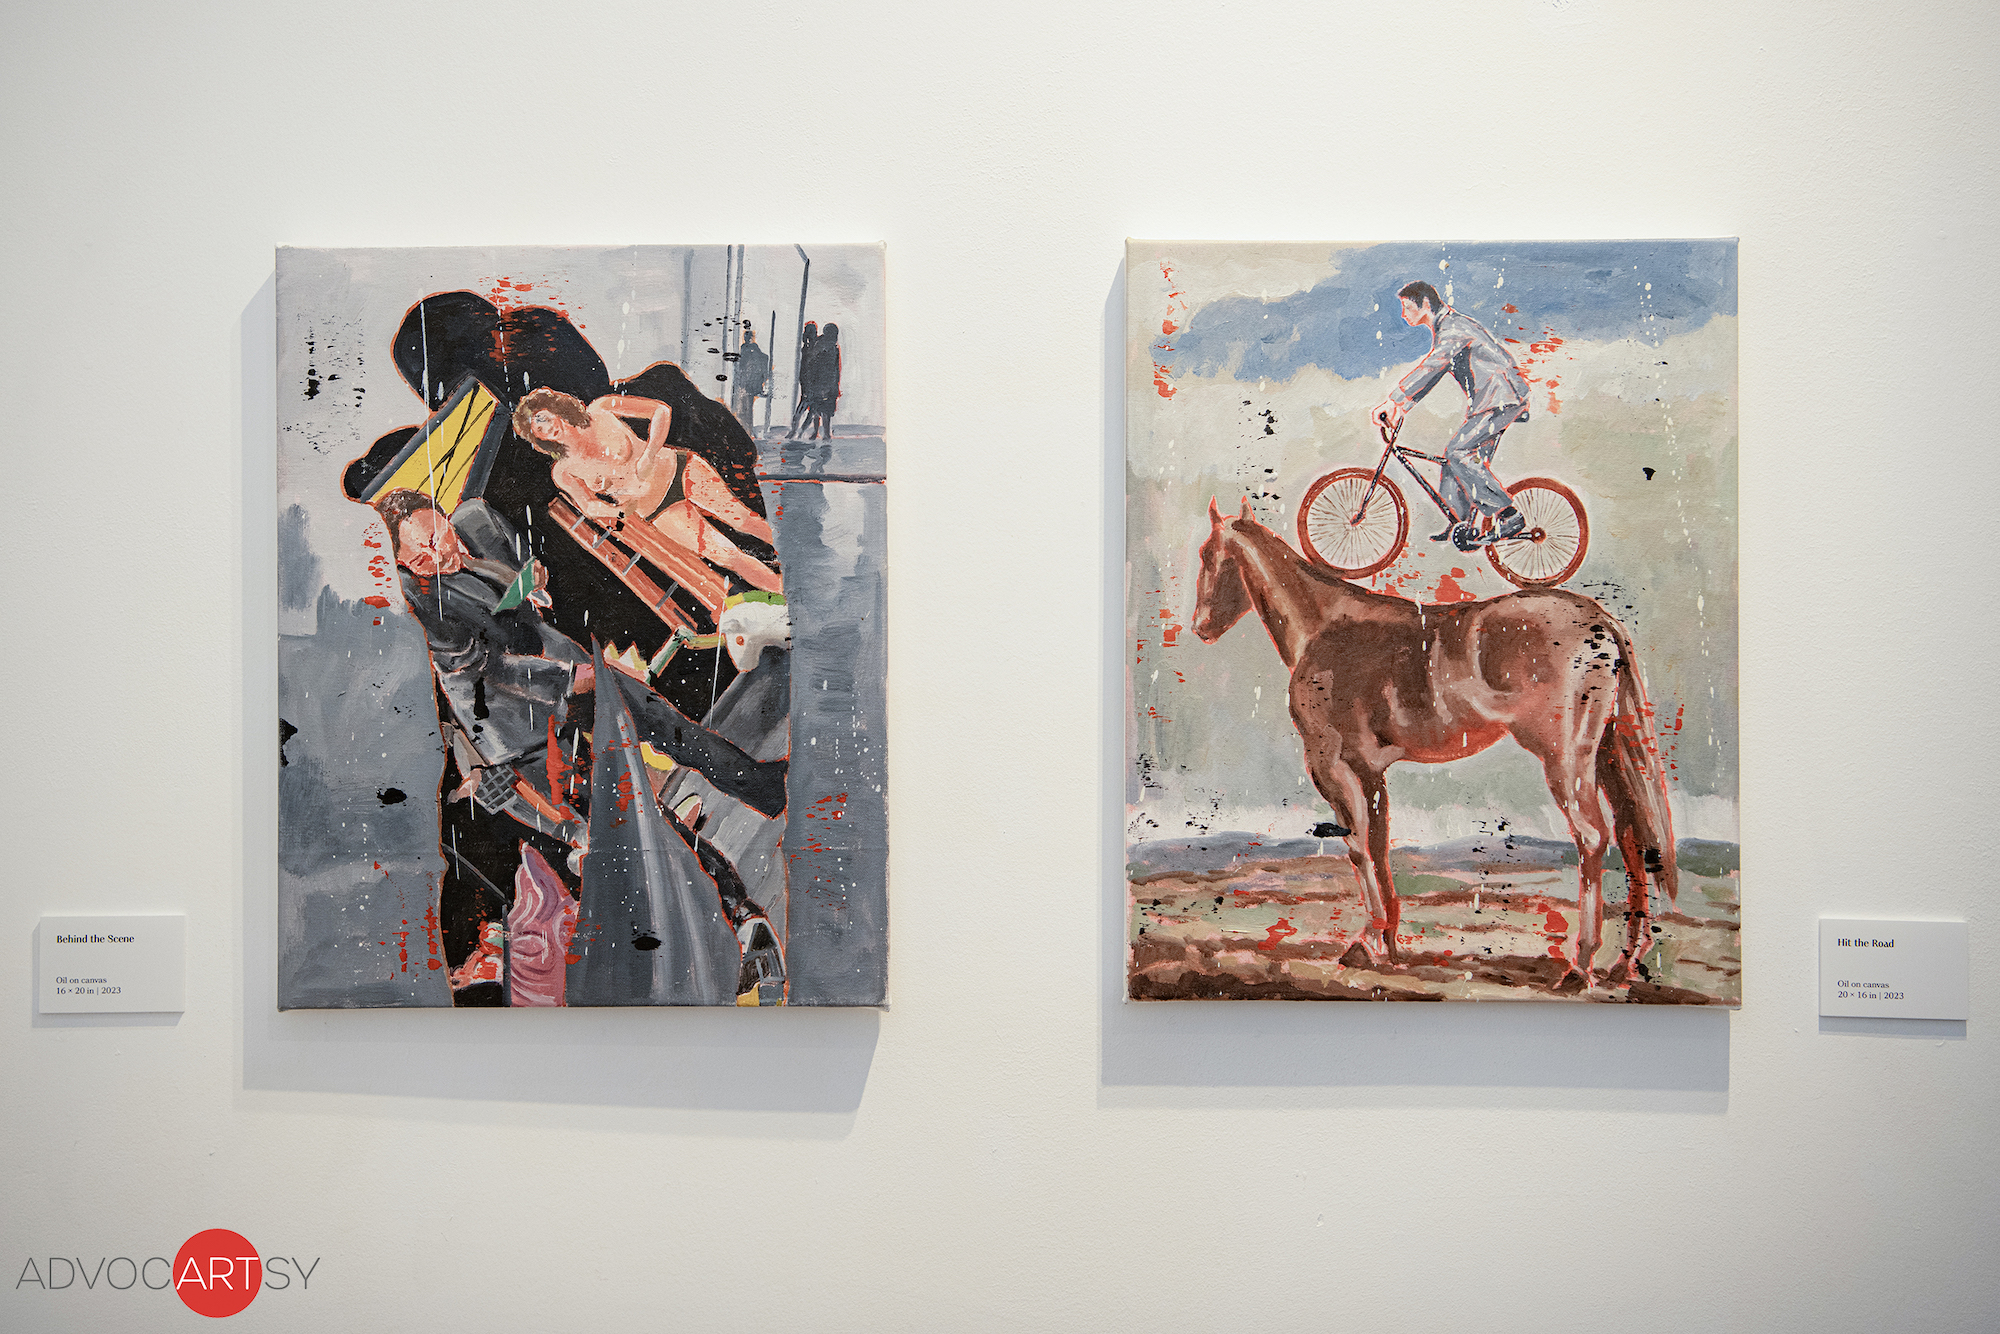 Installation shot of "Behind the Scene" and "Hit the Road," from Nicky Nodjoumi's Los Angeles art exhibit at ADVOCARTSY